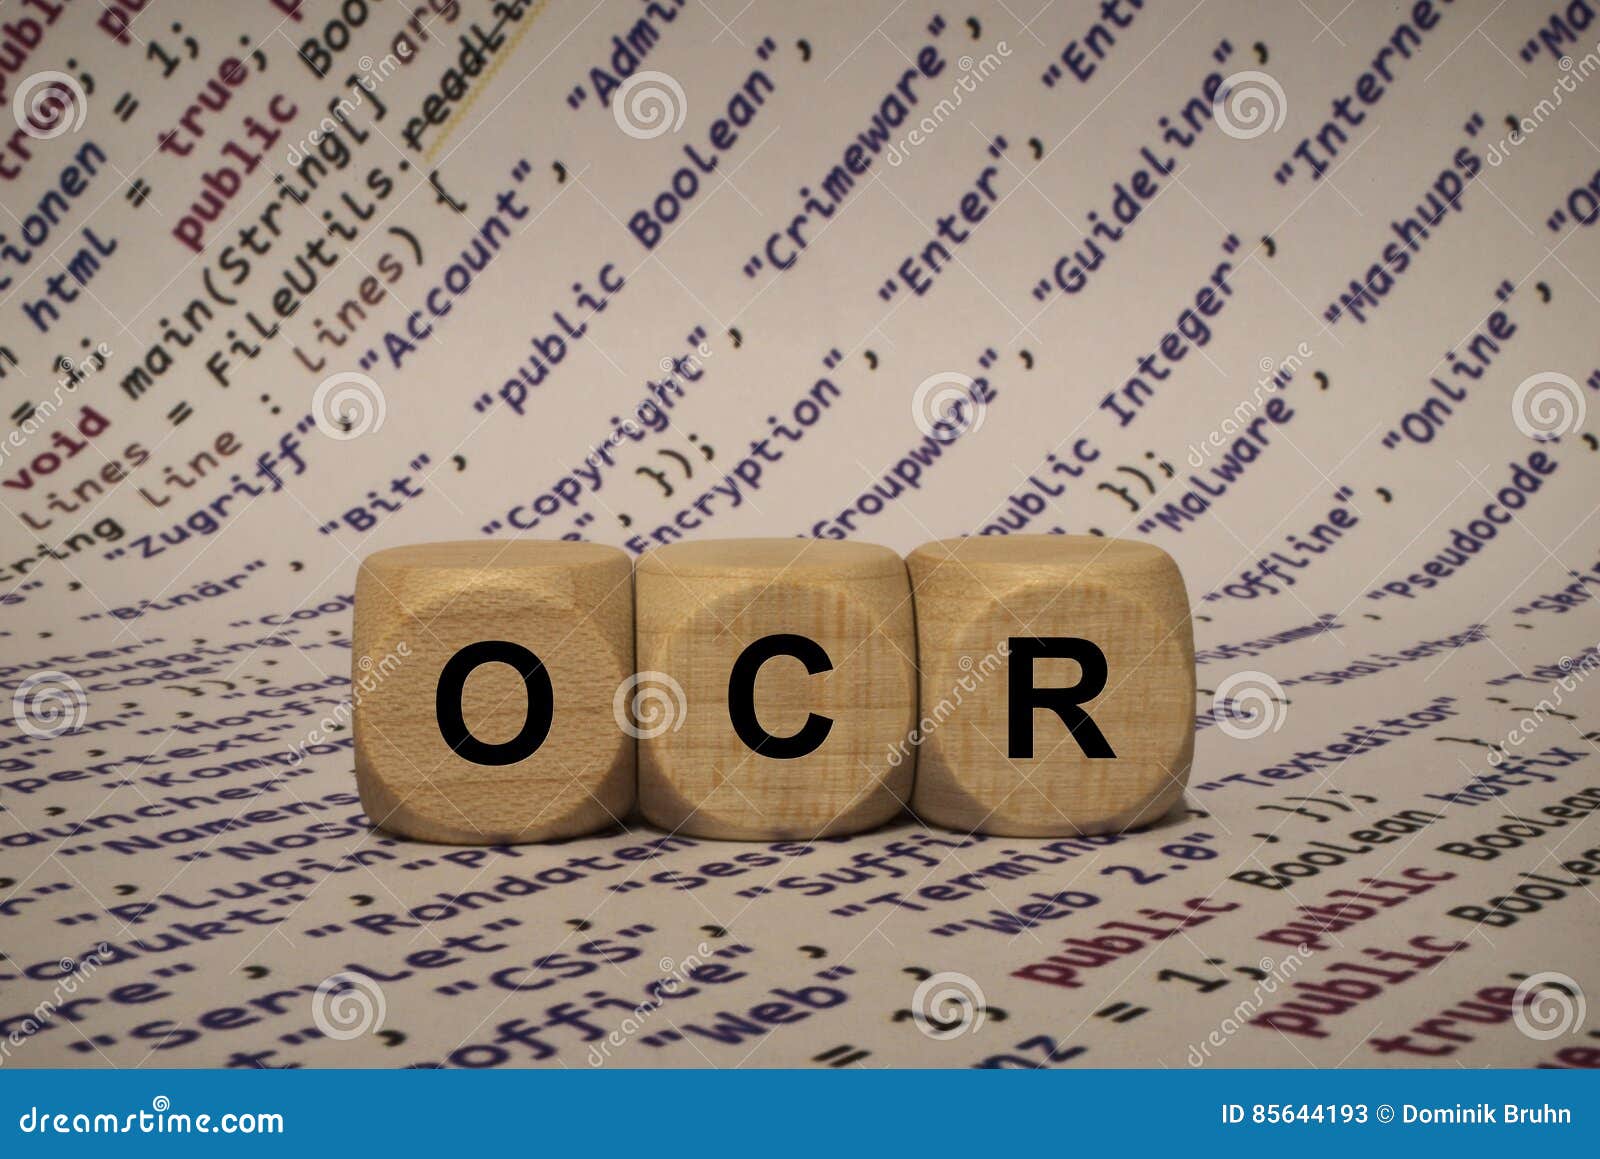 ocr - cube with letters and words from the computer, software, internet categories, wooden cubes